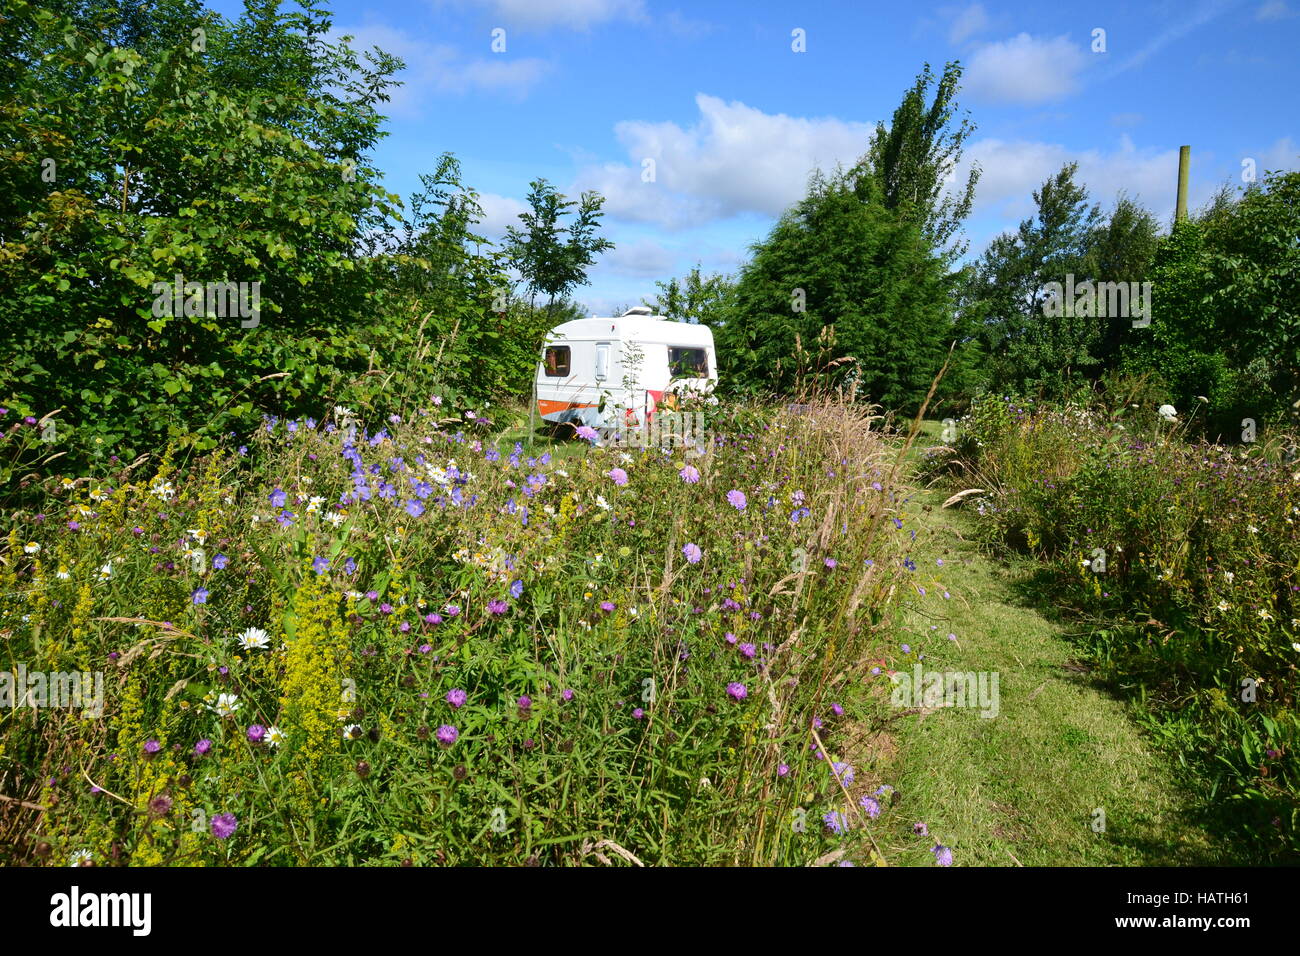 A Freedom Caravan in a wild flower meadow in Lincolnshire, UK Stock Photo